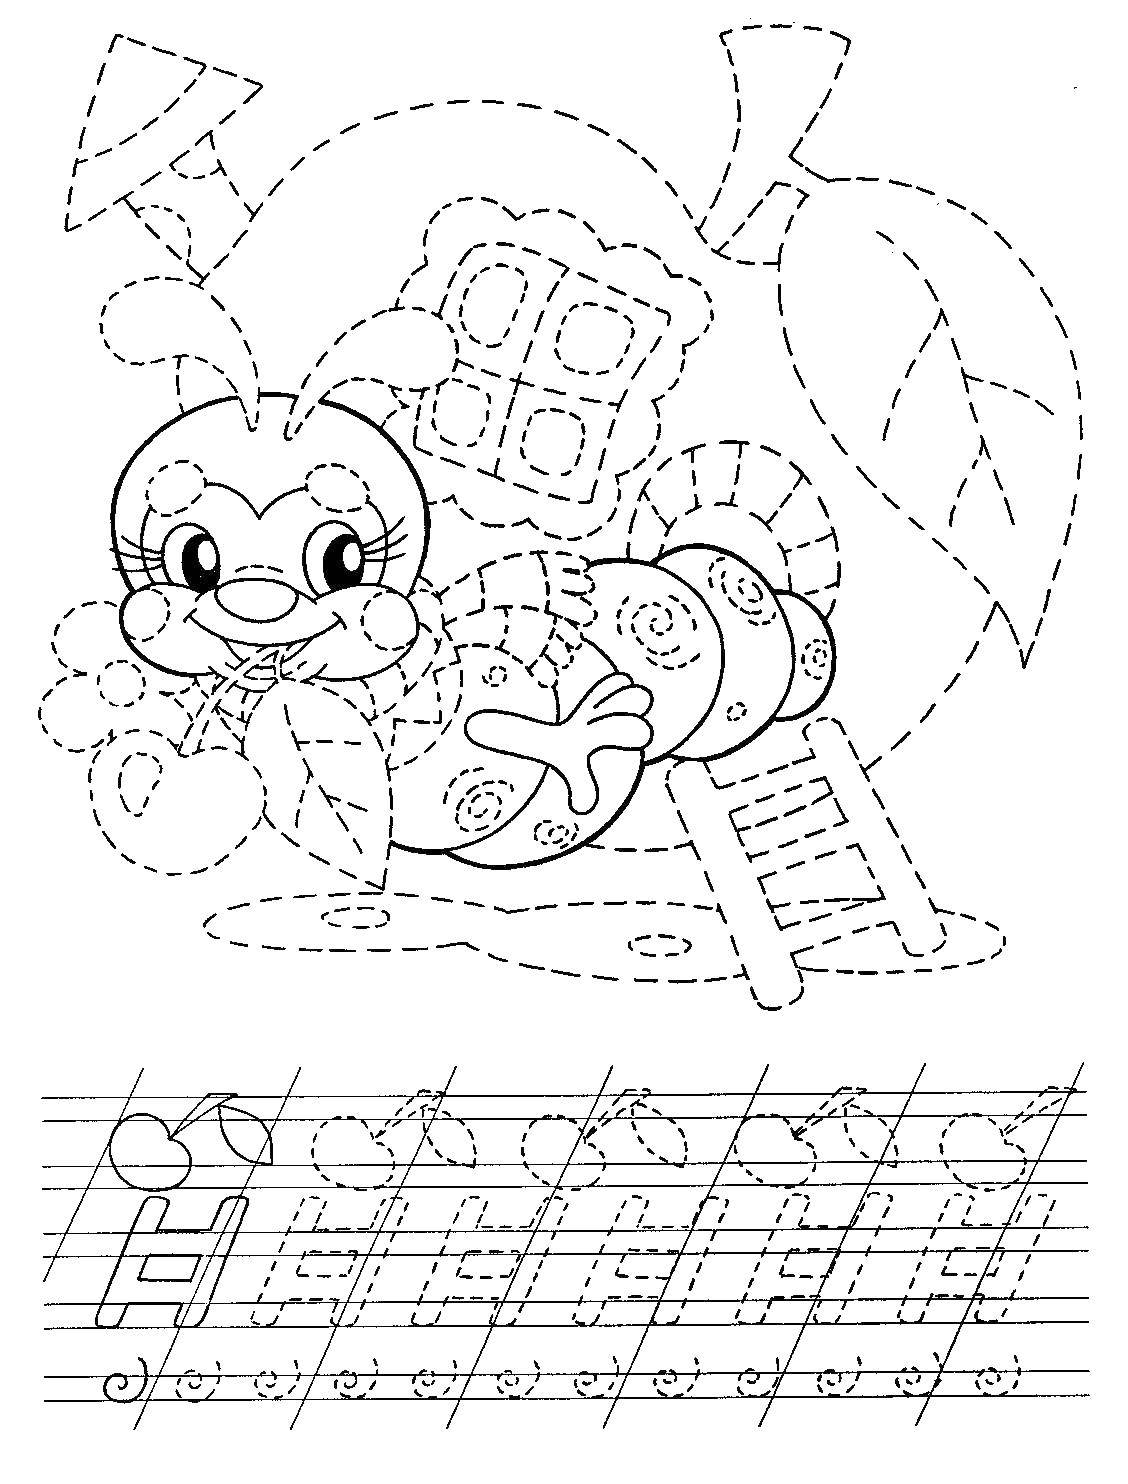 Coloring The thing with the caterpillar. Category school. Tags:  caterpillar, Apple, cherry, recipe.